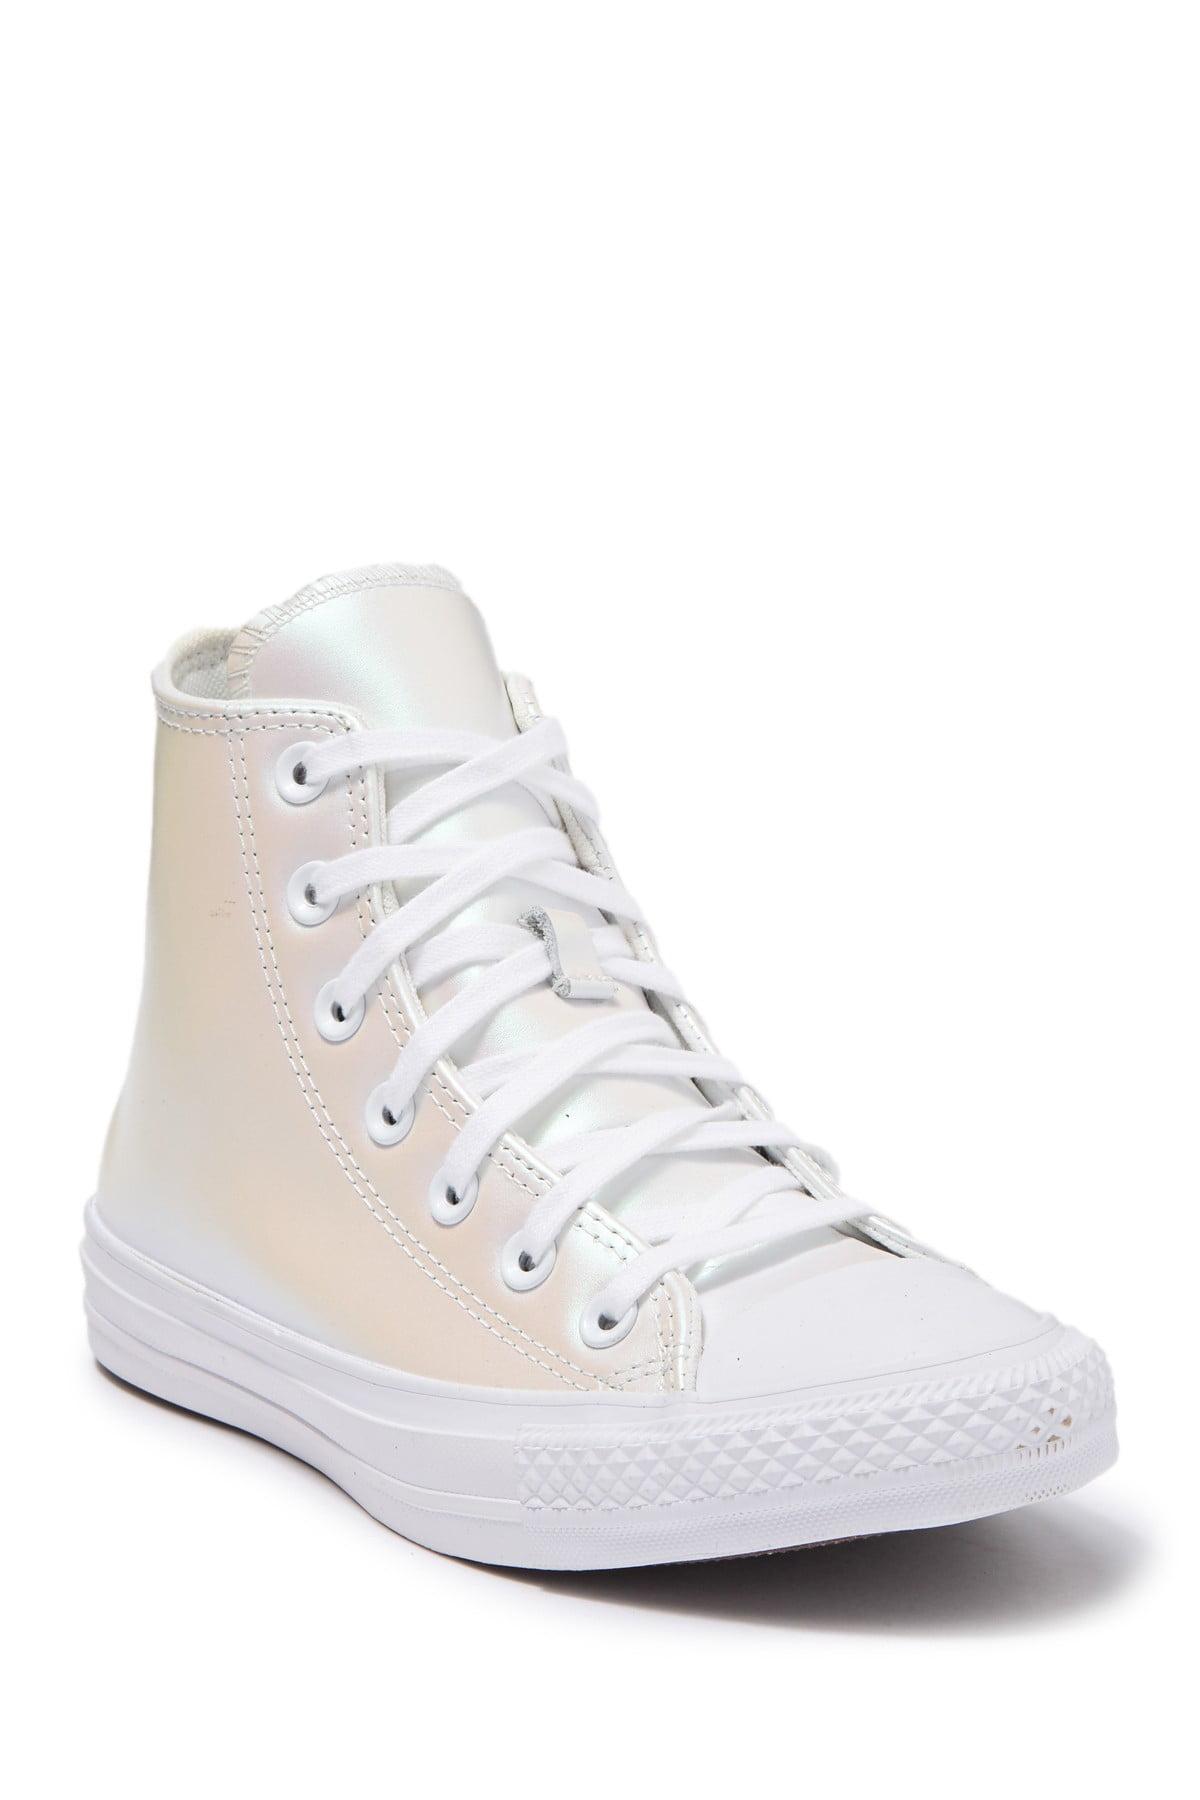 Converse Academy Oxford Sneaker in White | Lyst